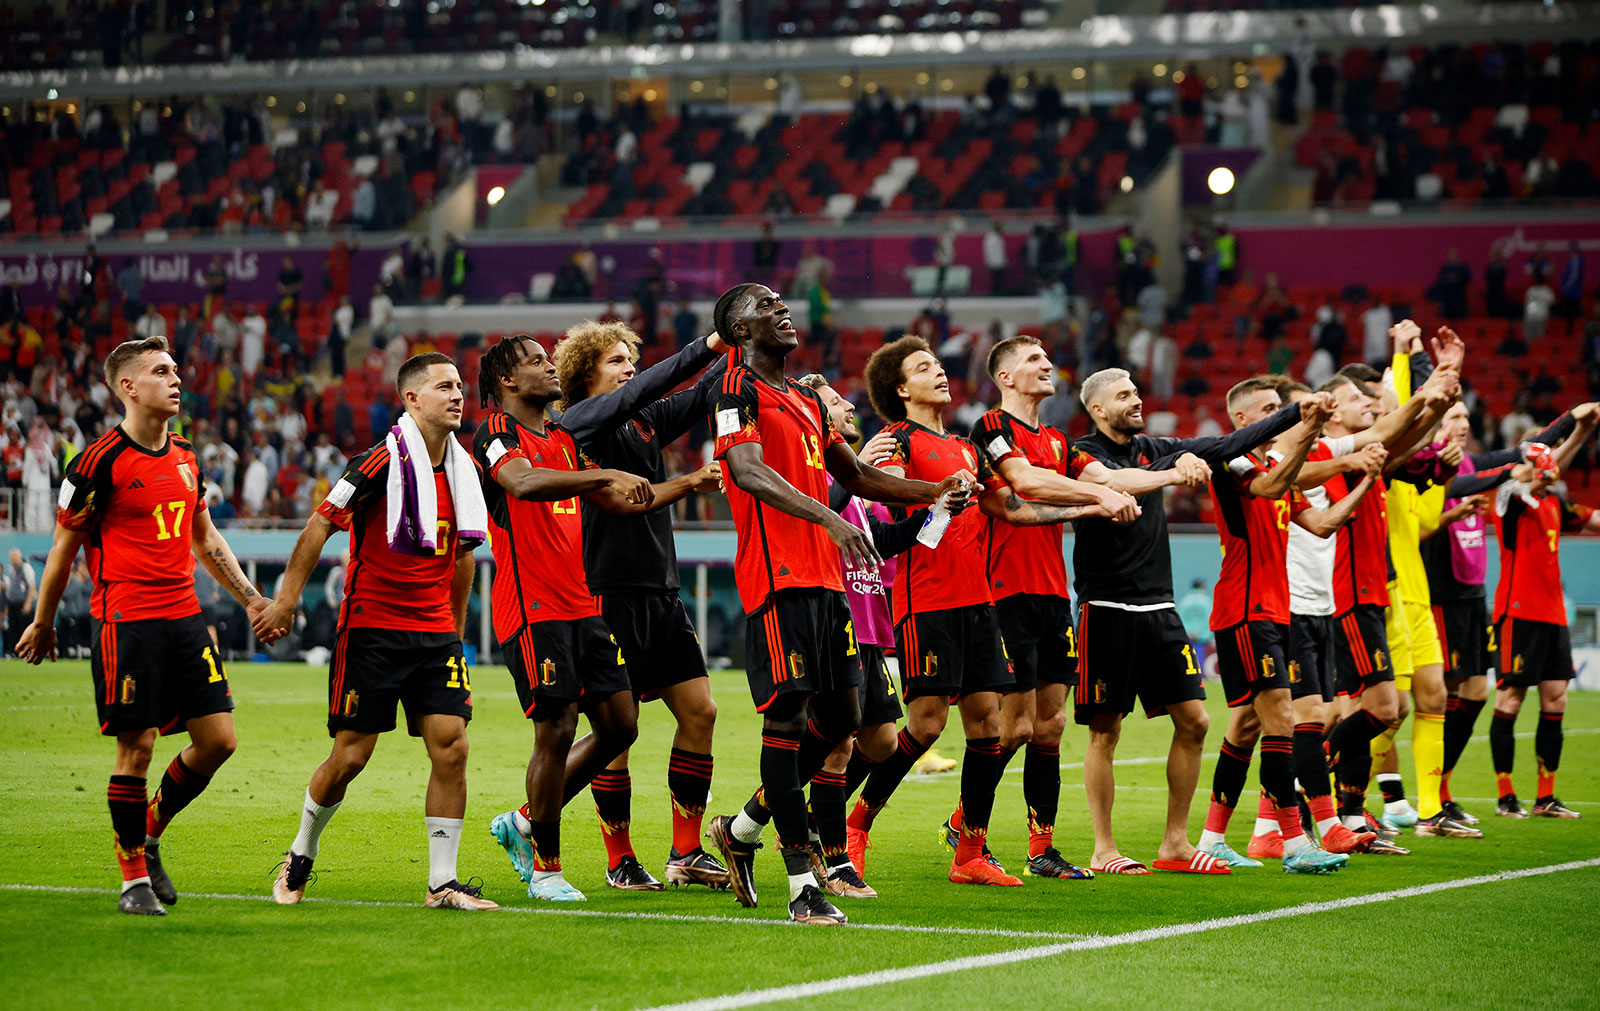 Belgium players celebrate after the match against Canada on November 23.